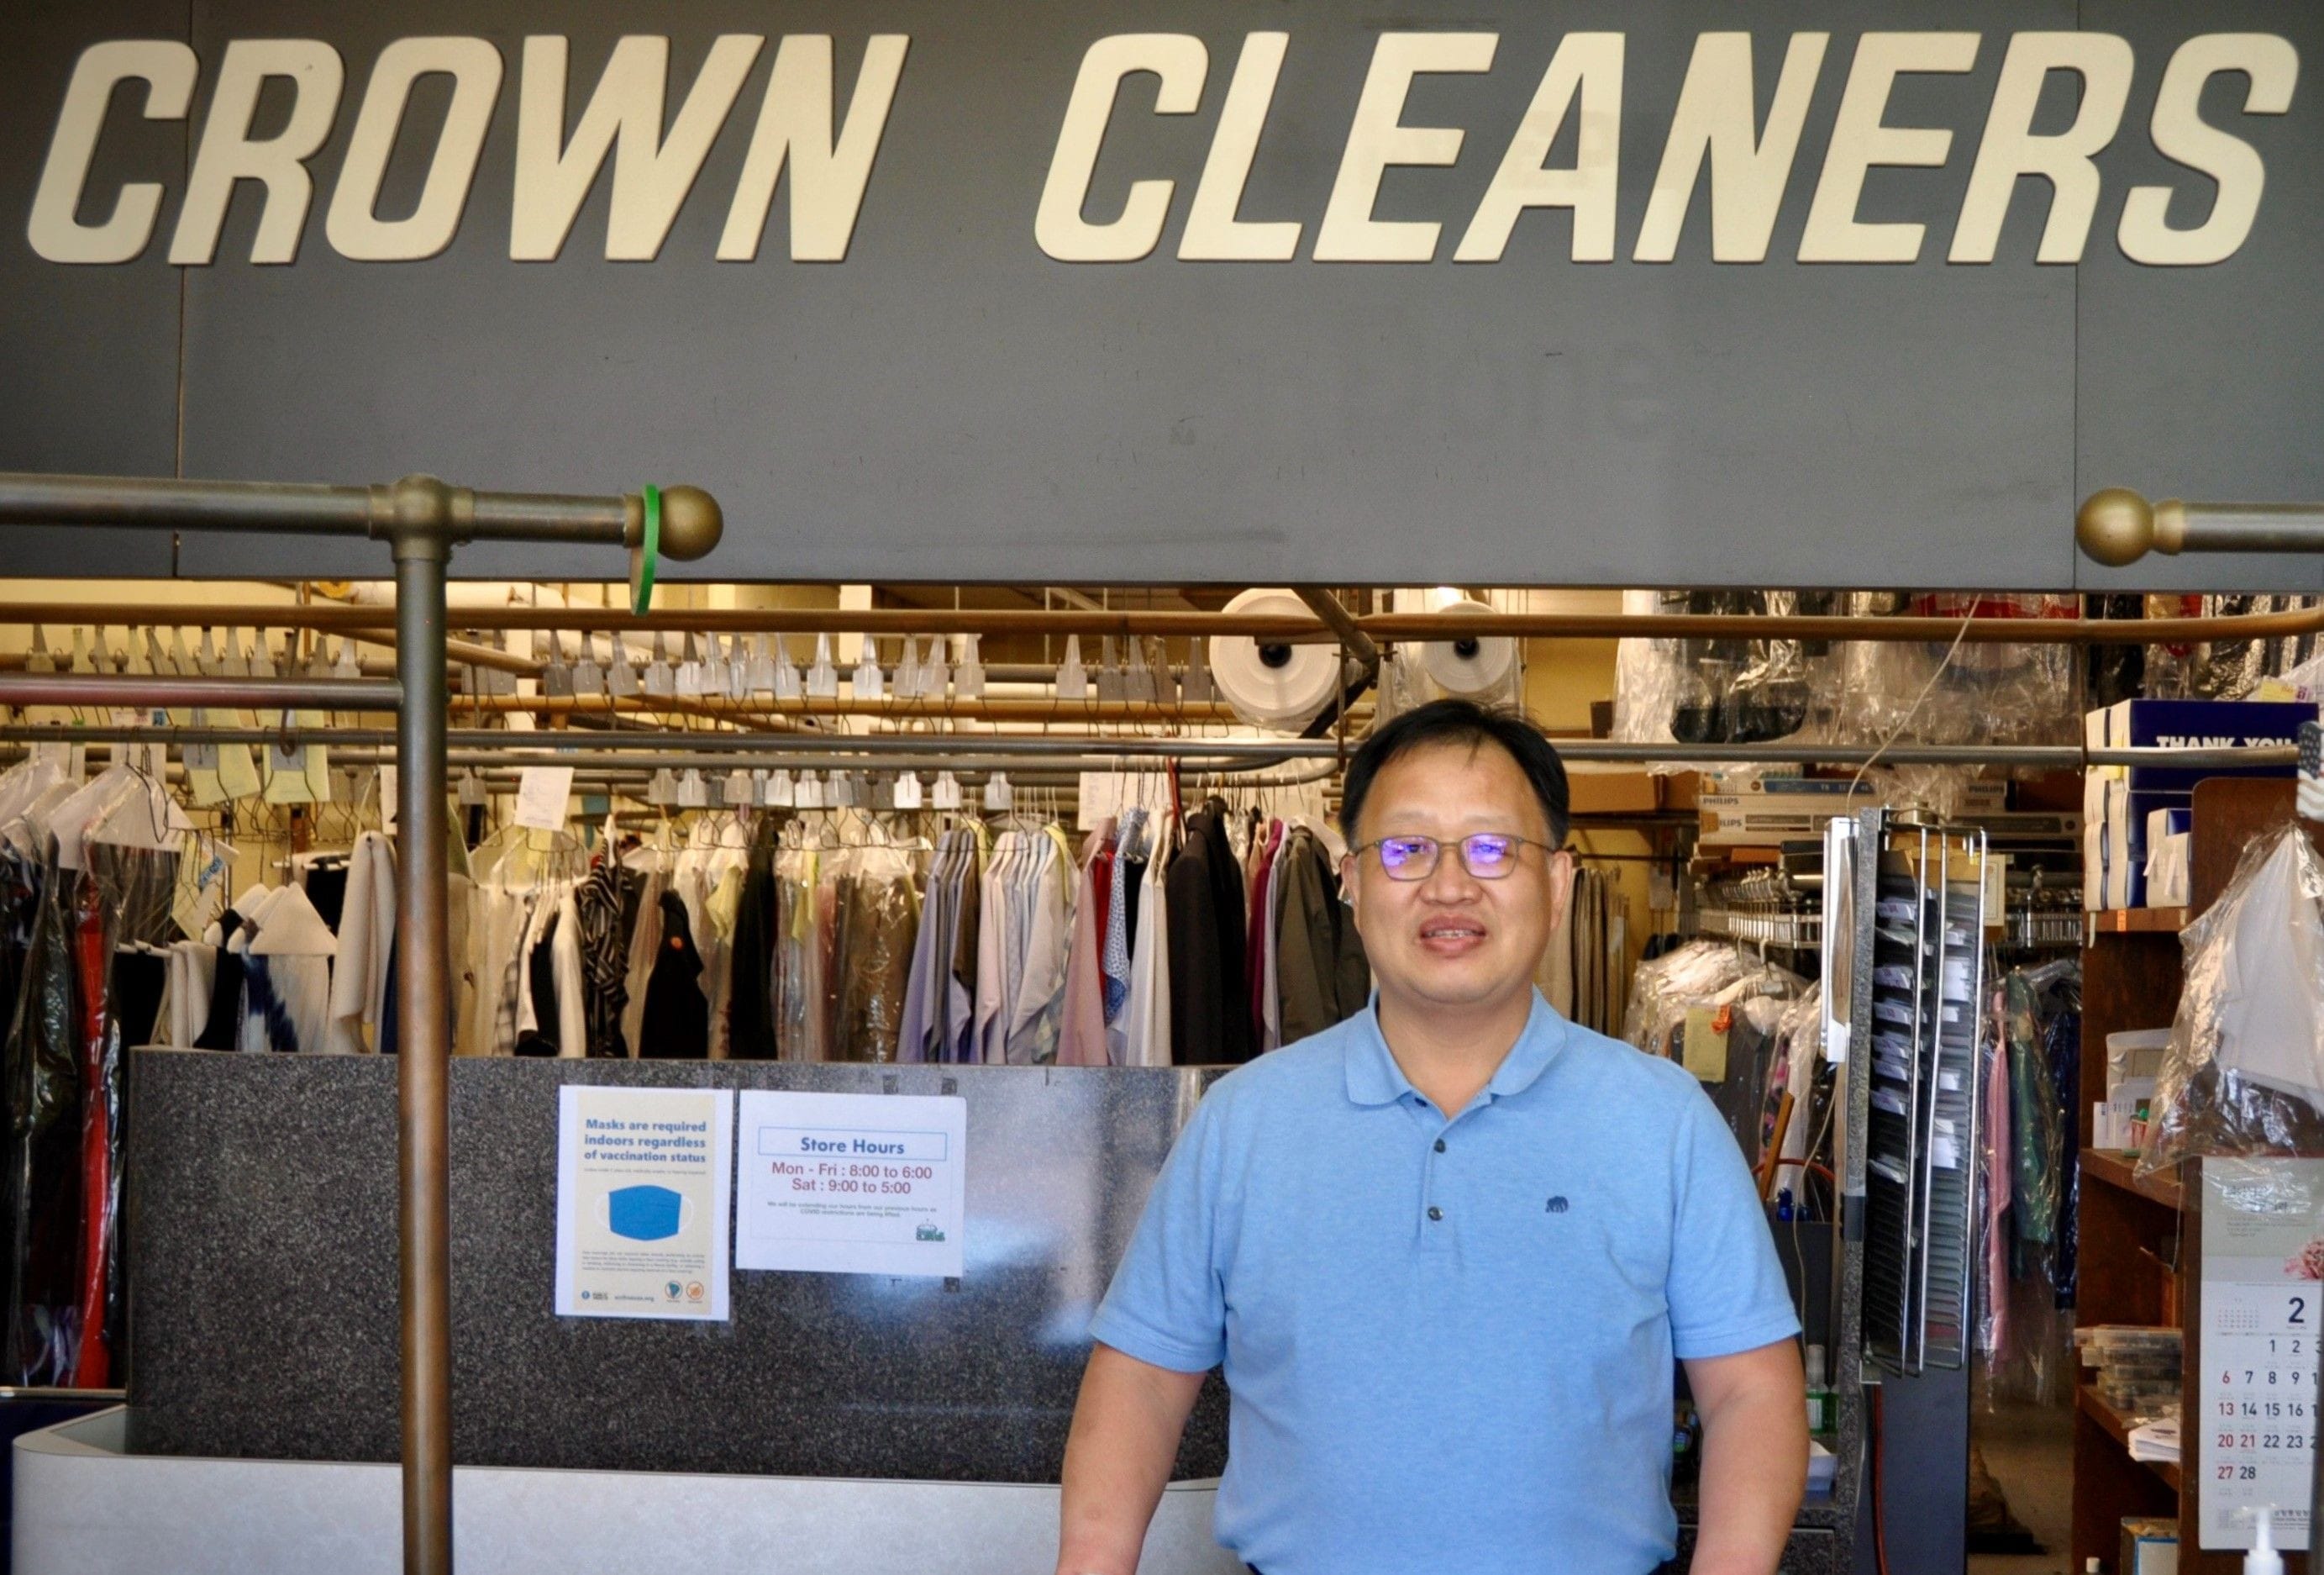 The owner of Crown Cleaners standing at the counter.